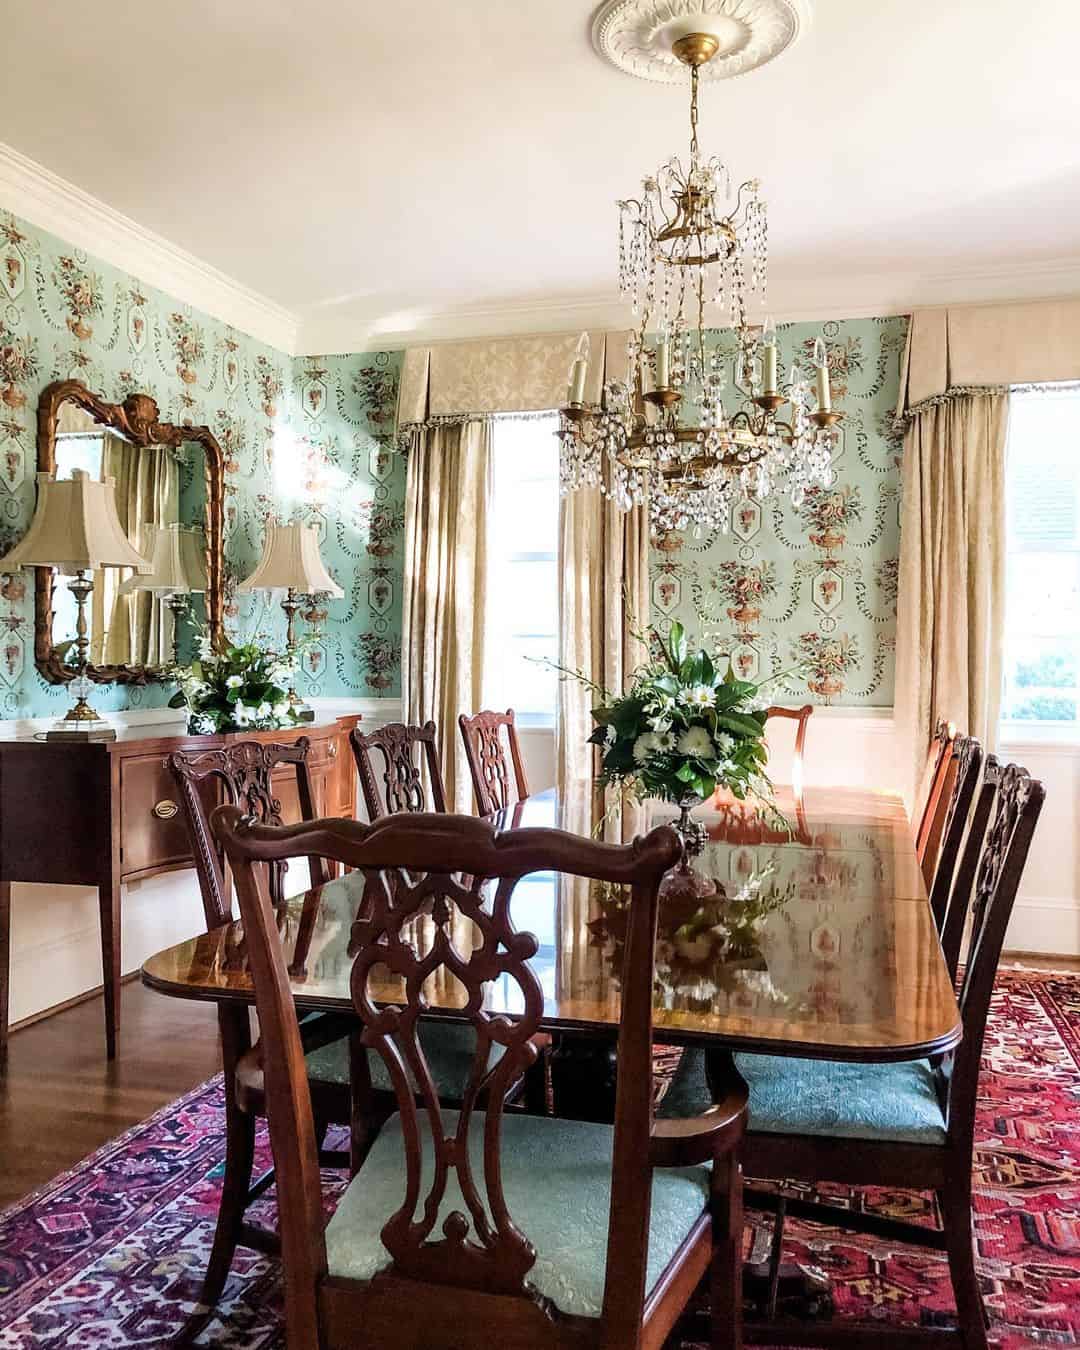 Sumptuous Dining Room With Mint Green Wallpaper - Soul & Lane